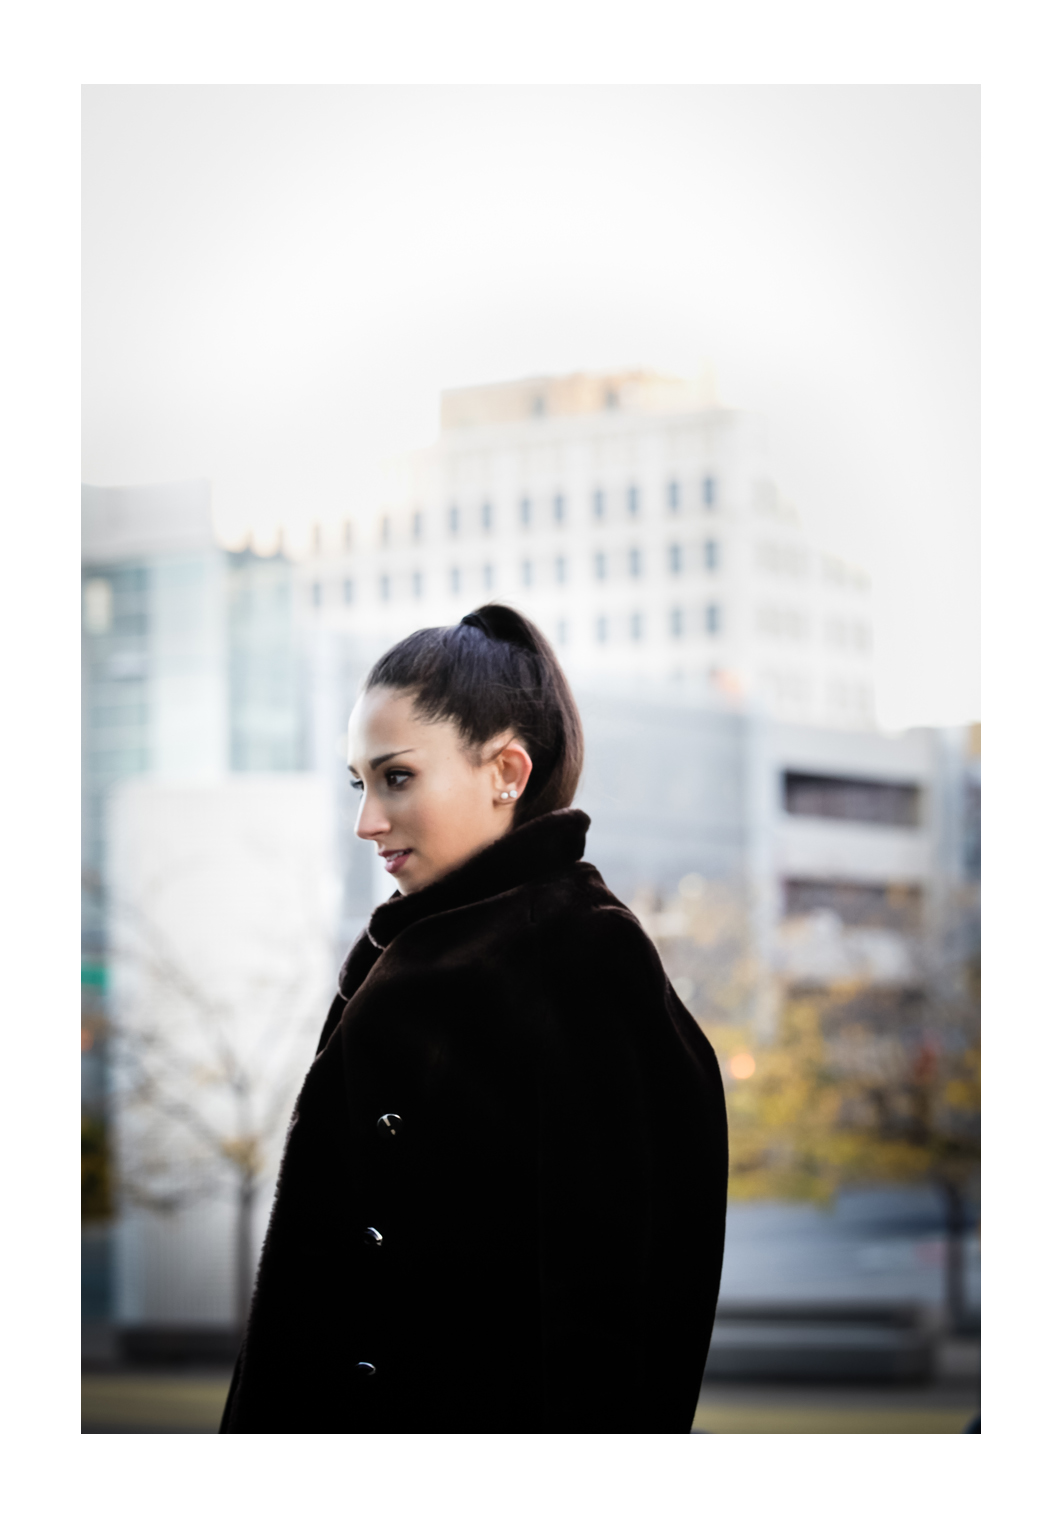 A model with dark brown hair in a pony tail wears a thick fur coat in front of a grey sky while gazing in the distance away from the photographer